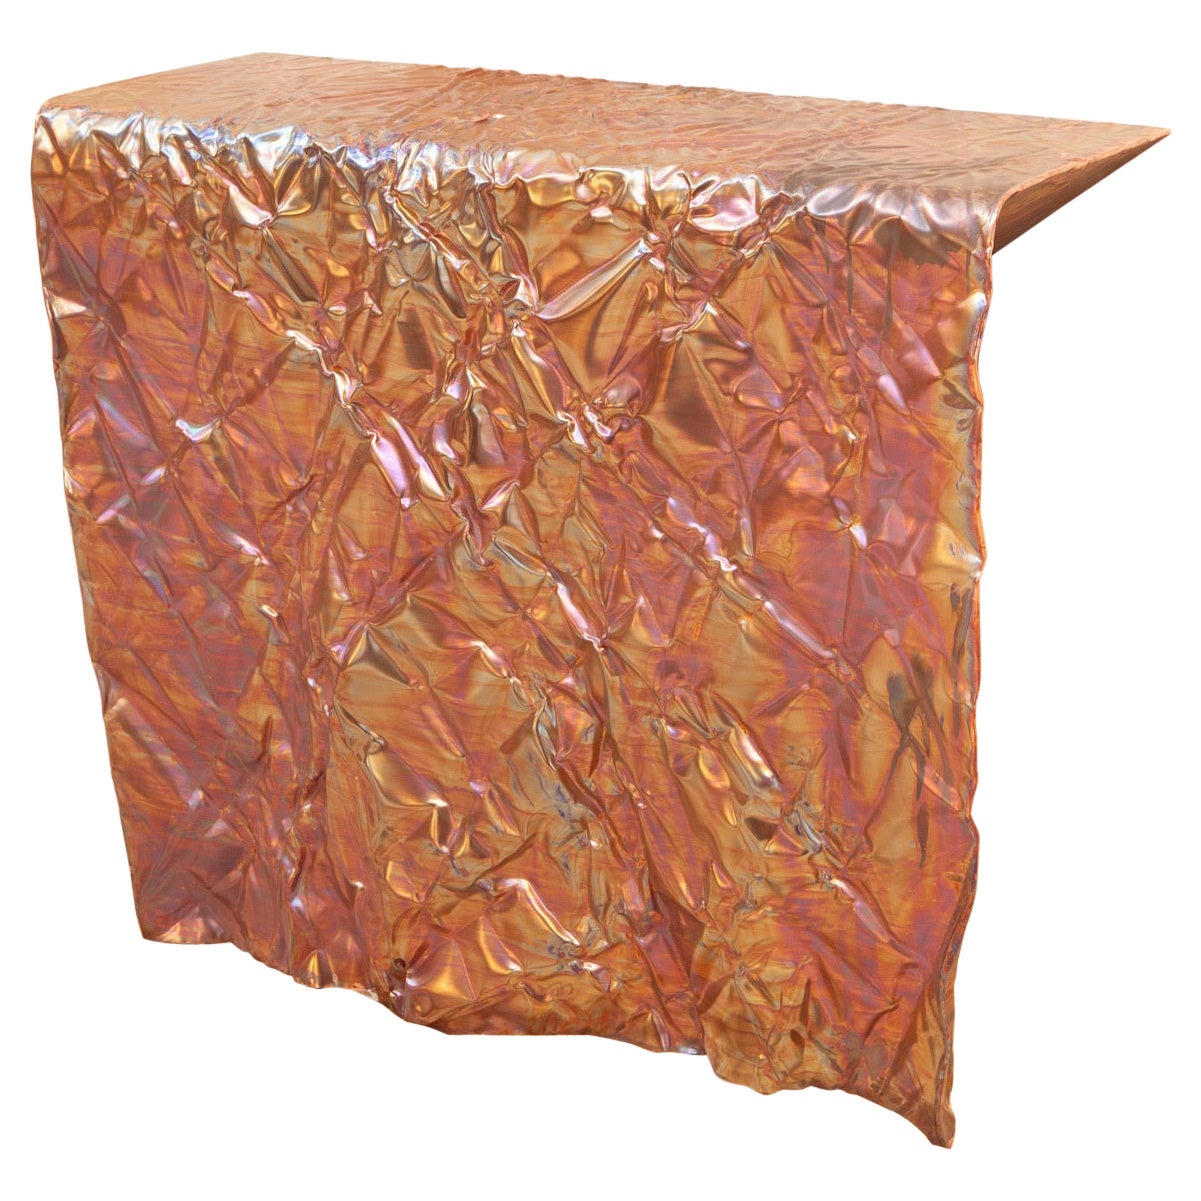 Christopher Prinz “Wrinkled Console” in Living Copper Finish For Sale